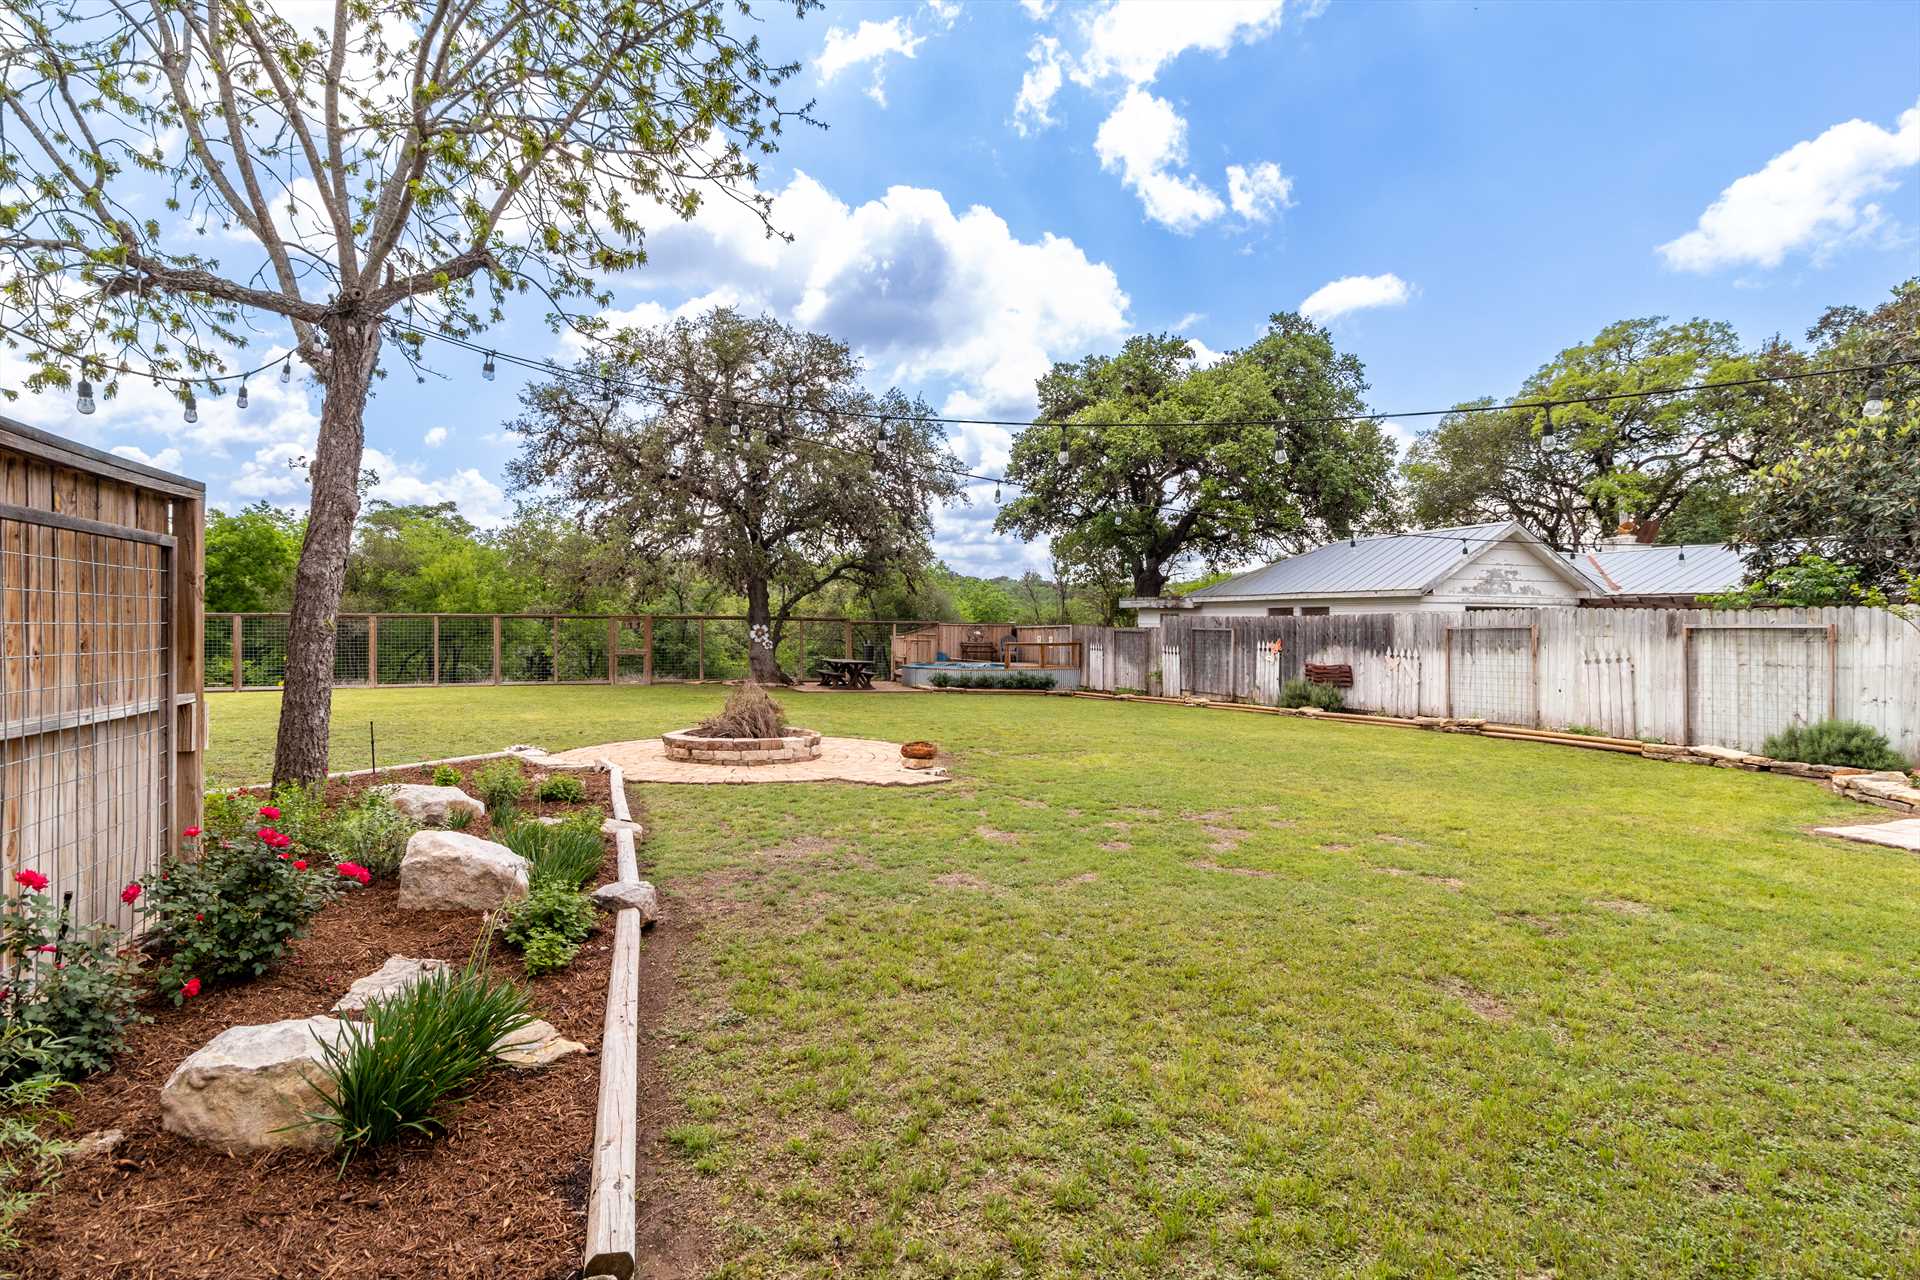                                                 Cypress Star's back yard features a fire pit, where the whole family can enjoy s'mores, conversation, and stargazing!